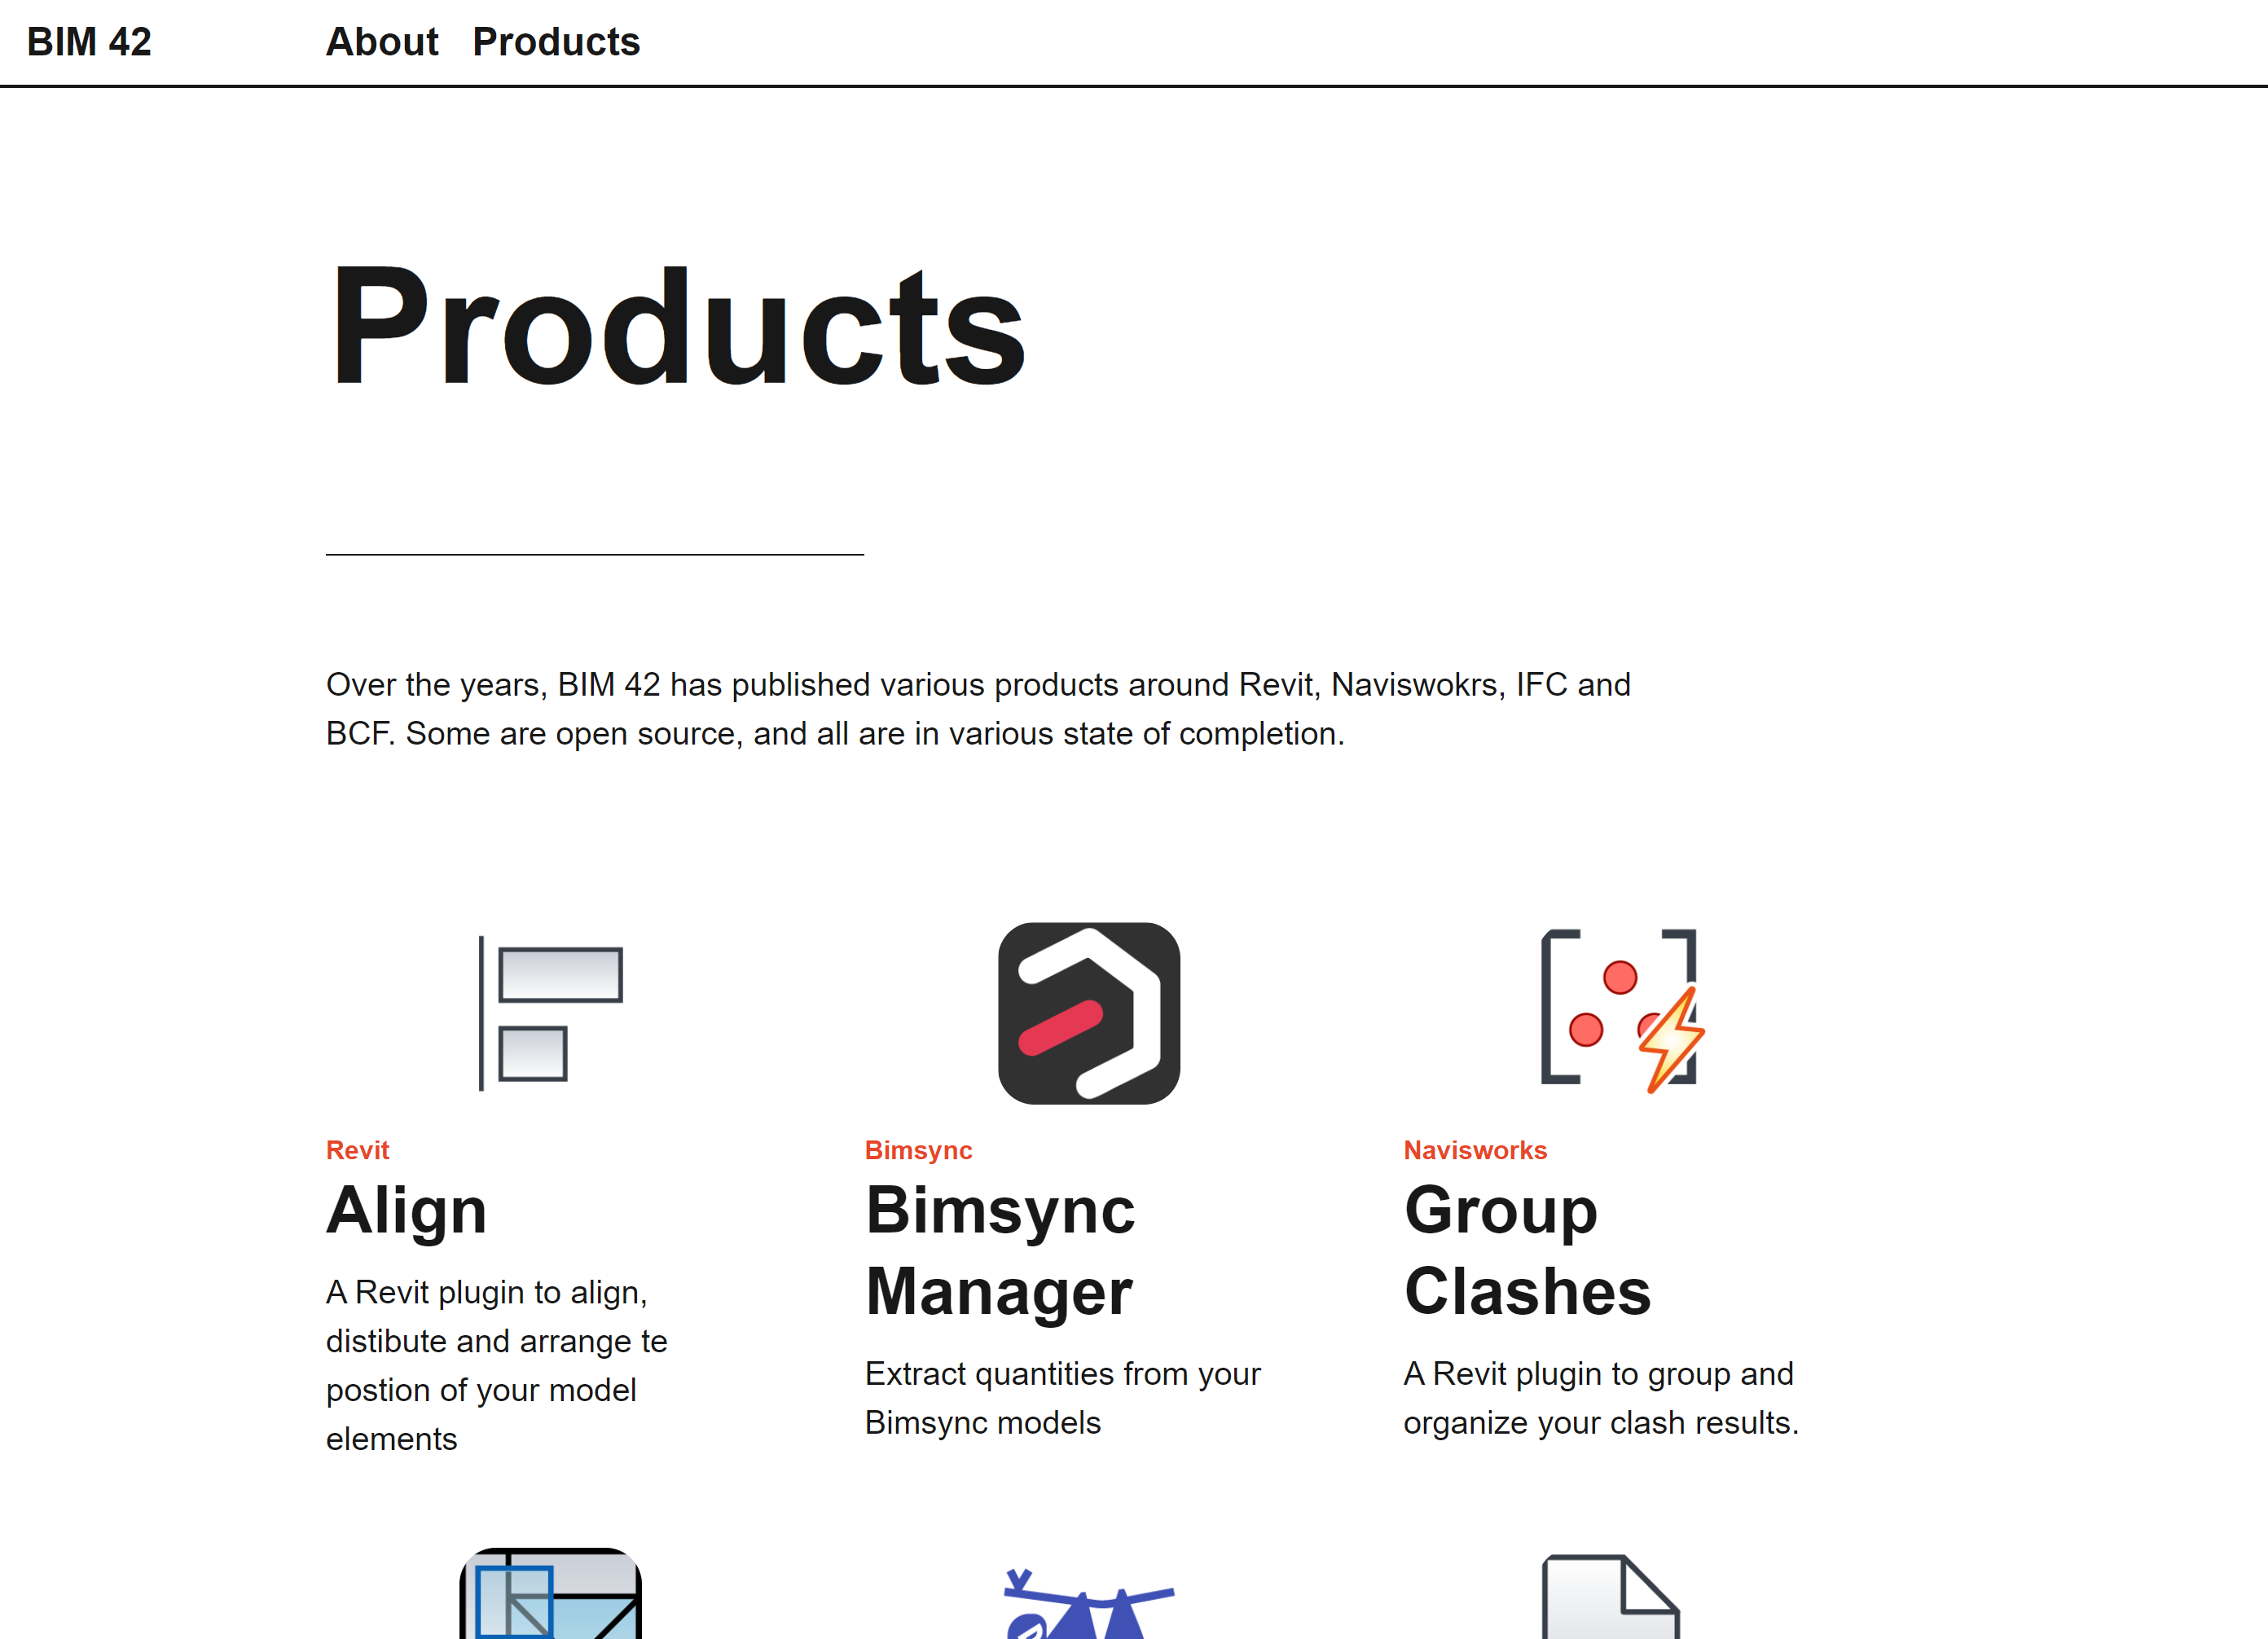 The product page